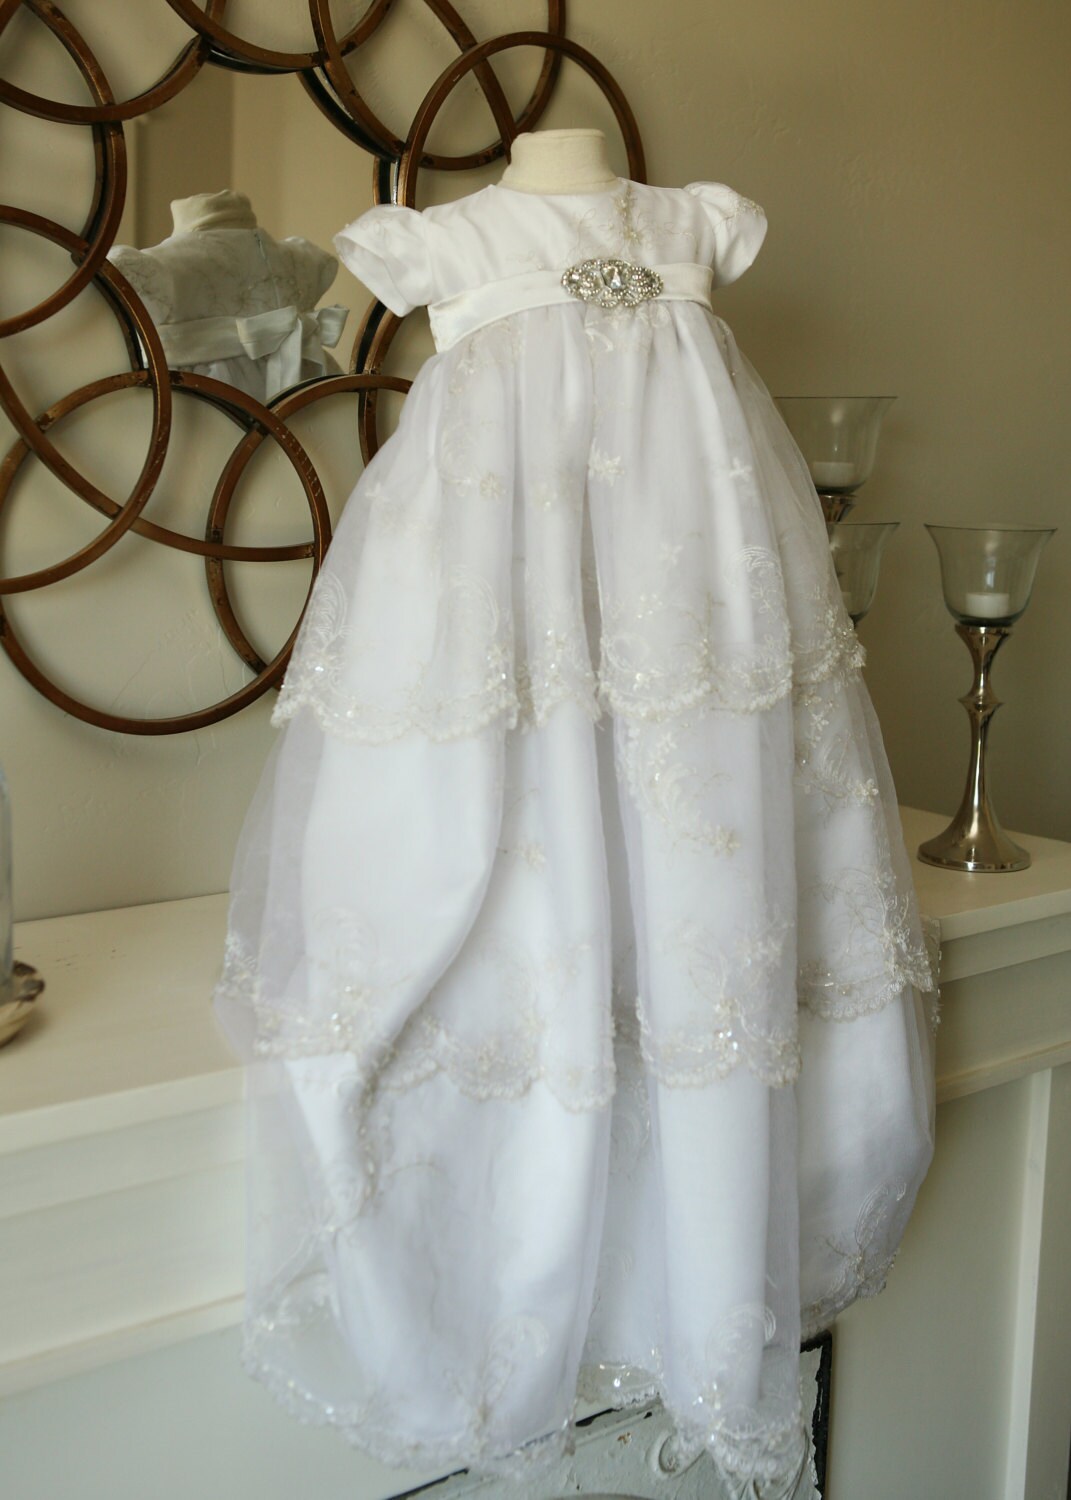 Lace Baptism Dress White Blessing Dress Christening Gown - Etsy